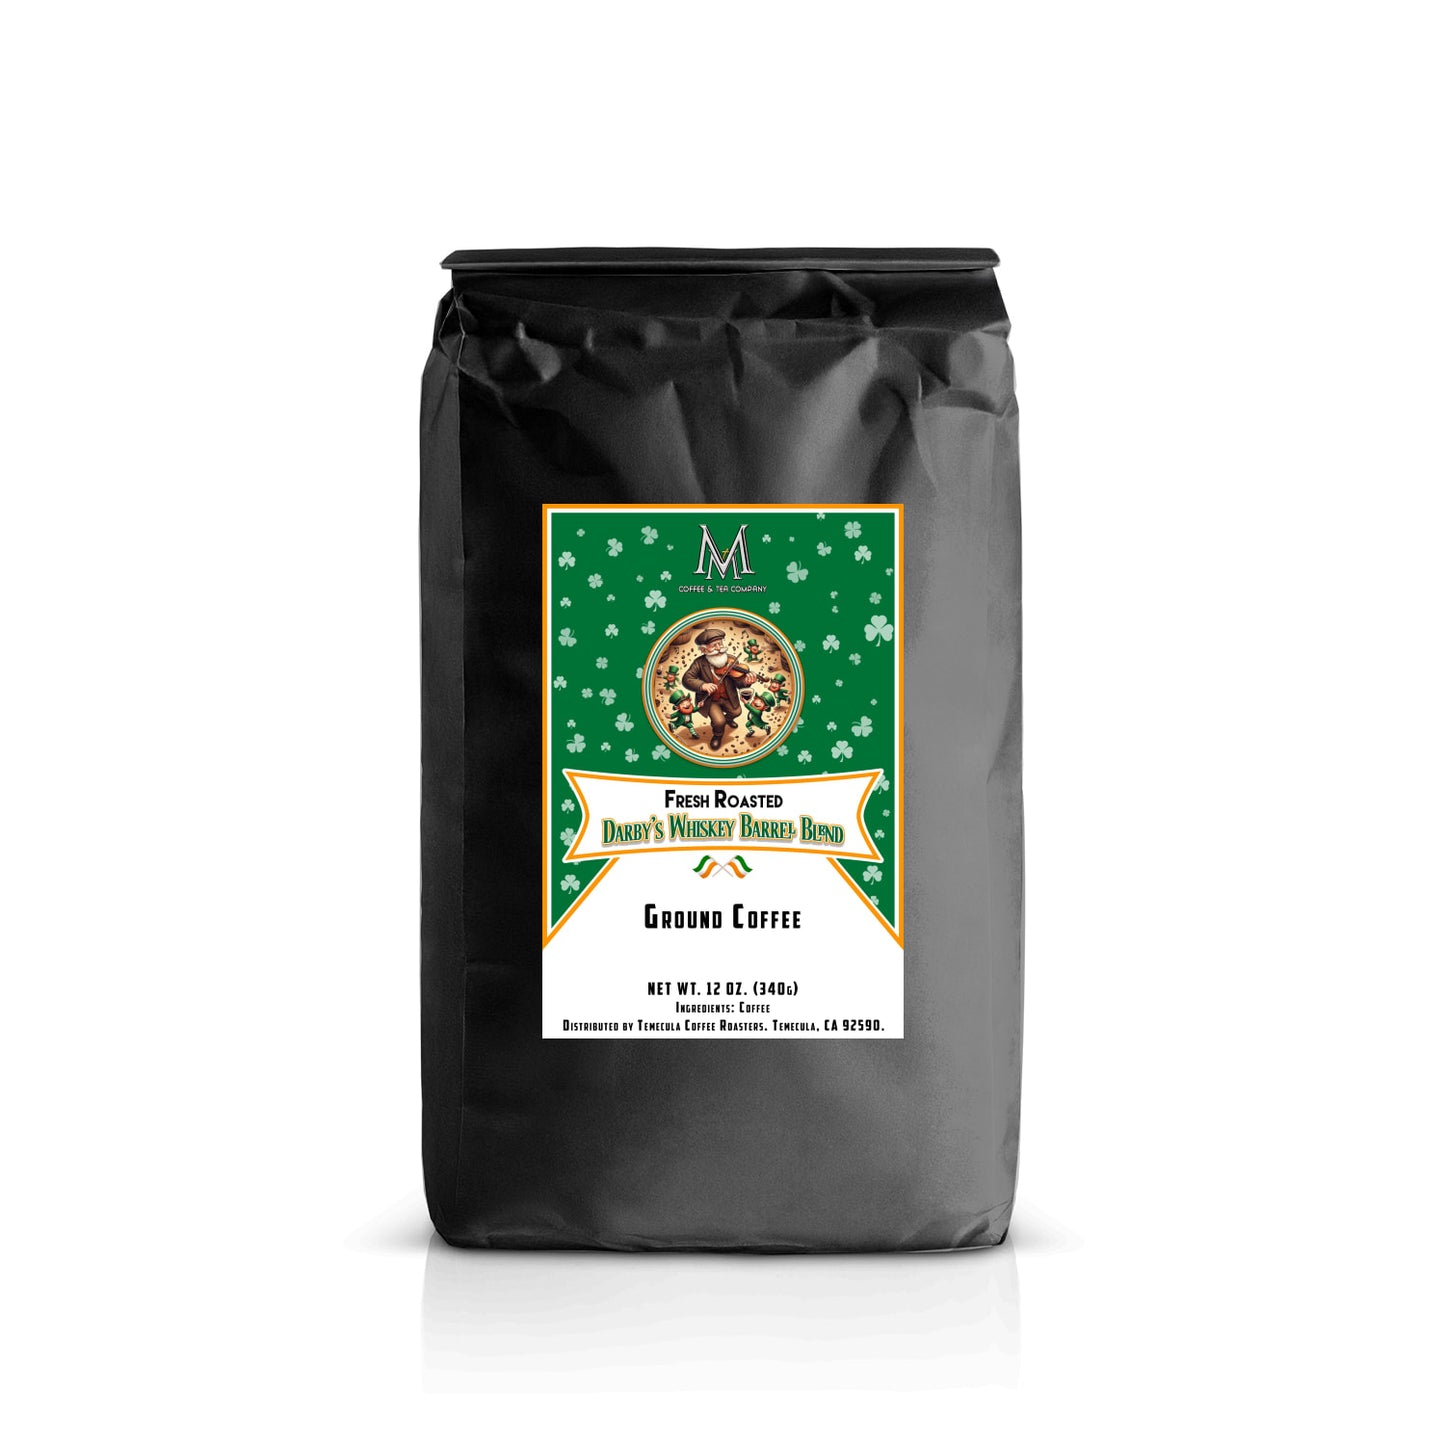 Darby's Whiskey Barrel Blend 12oz Ground-Special Edition - Milo's Coffee and Tea Company